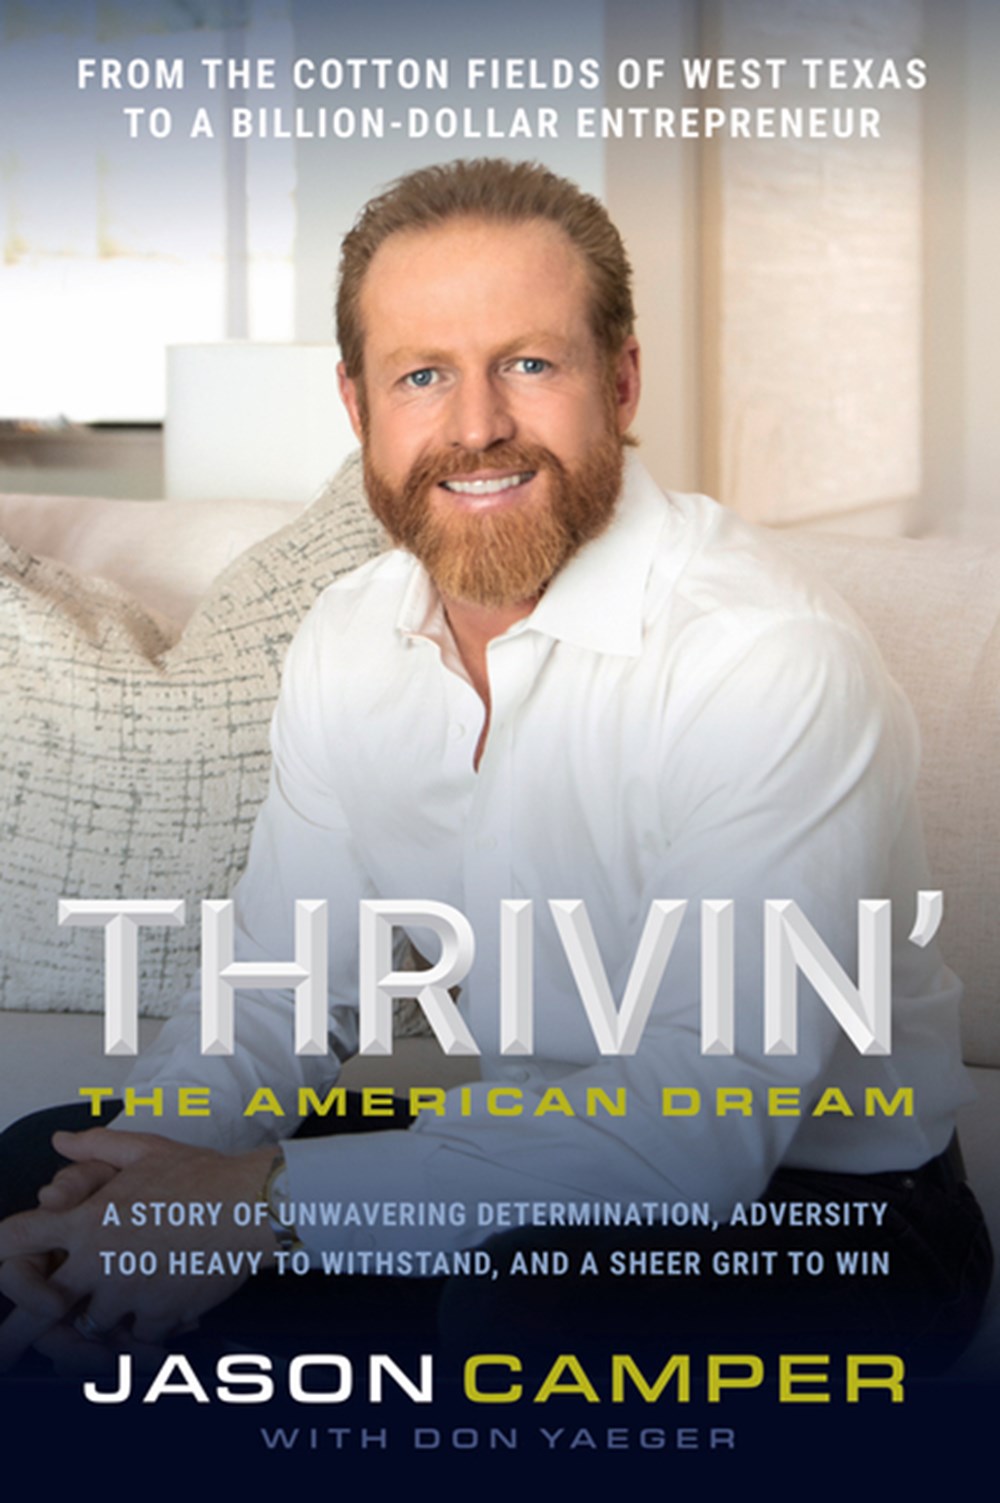 Thrivin' The American Dream: A Story of Unwavering Determination, Adversity Too Heavy to Withstand, 